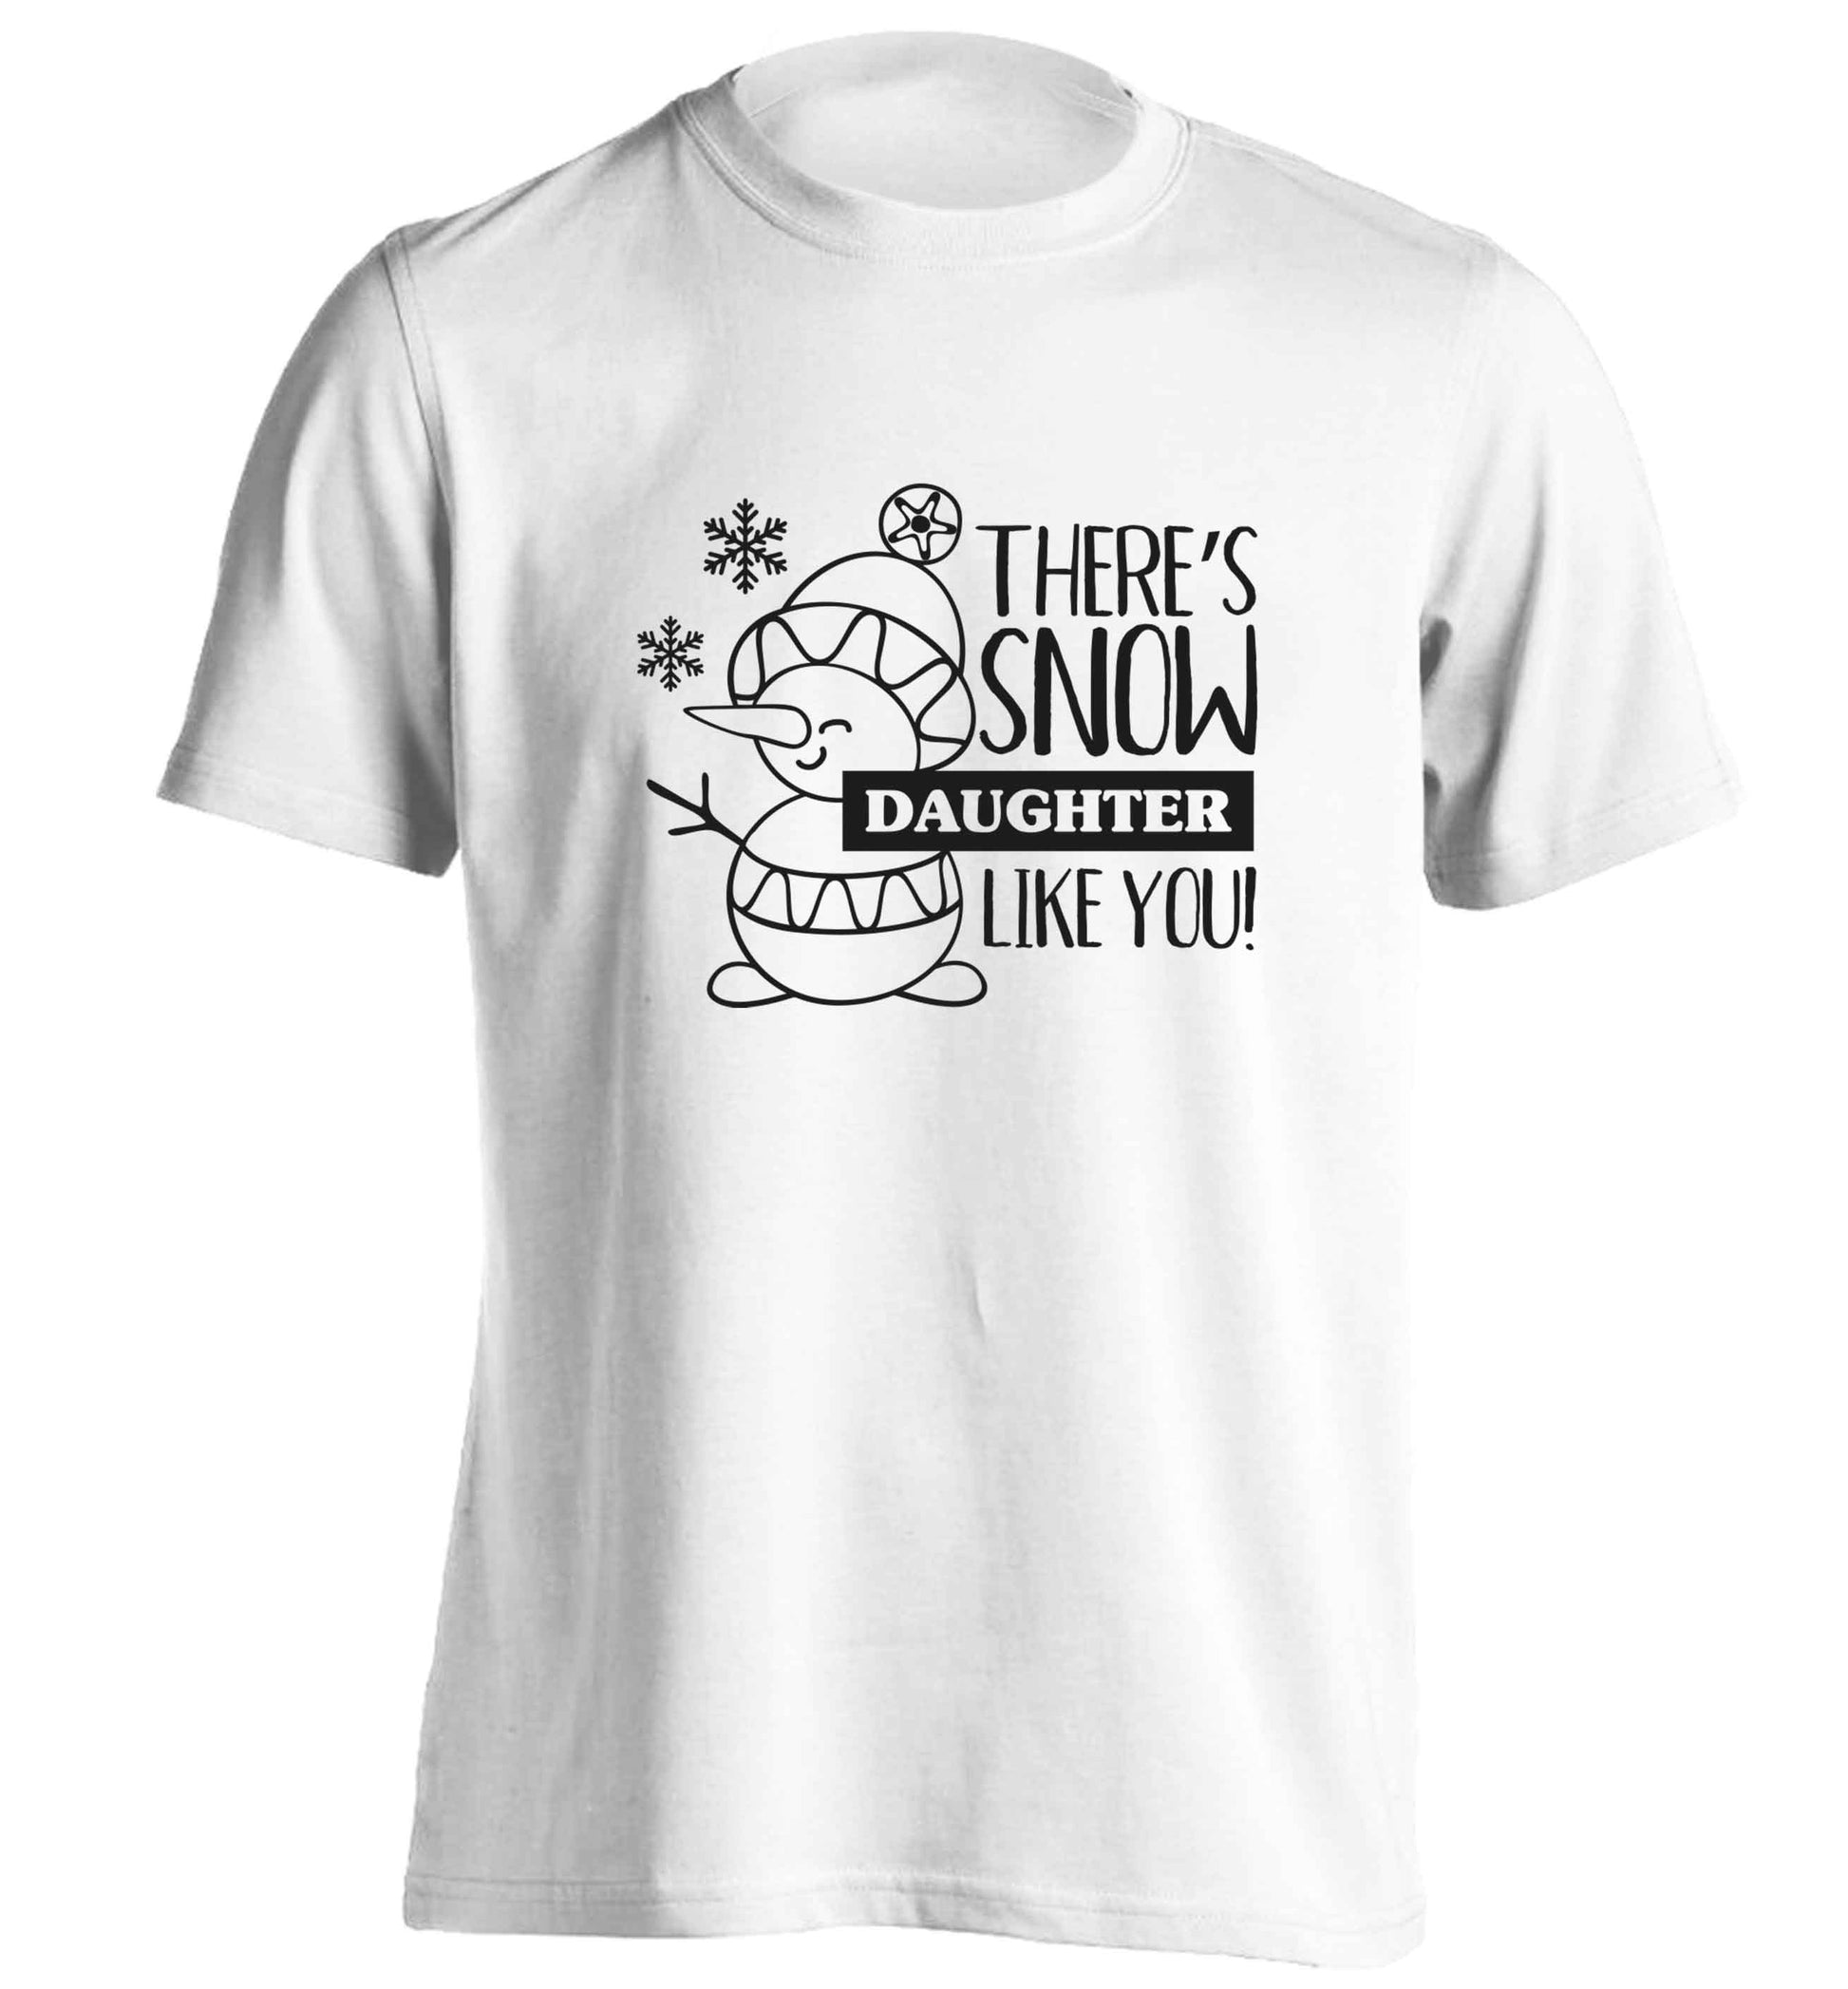 There's snow daughter like you adults unisex white Tshirt 2XL